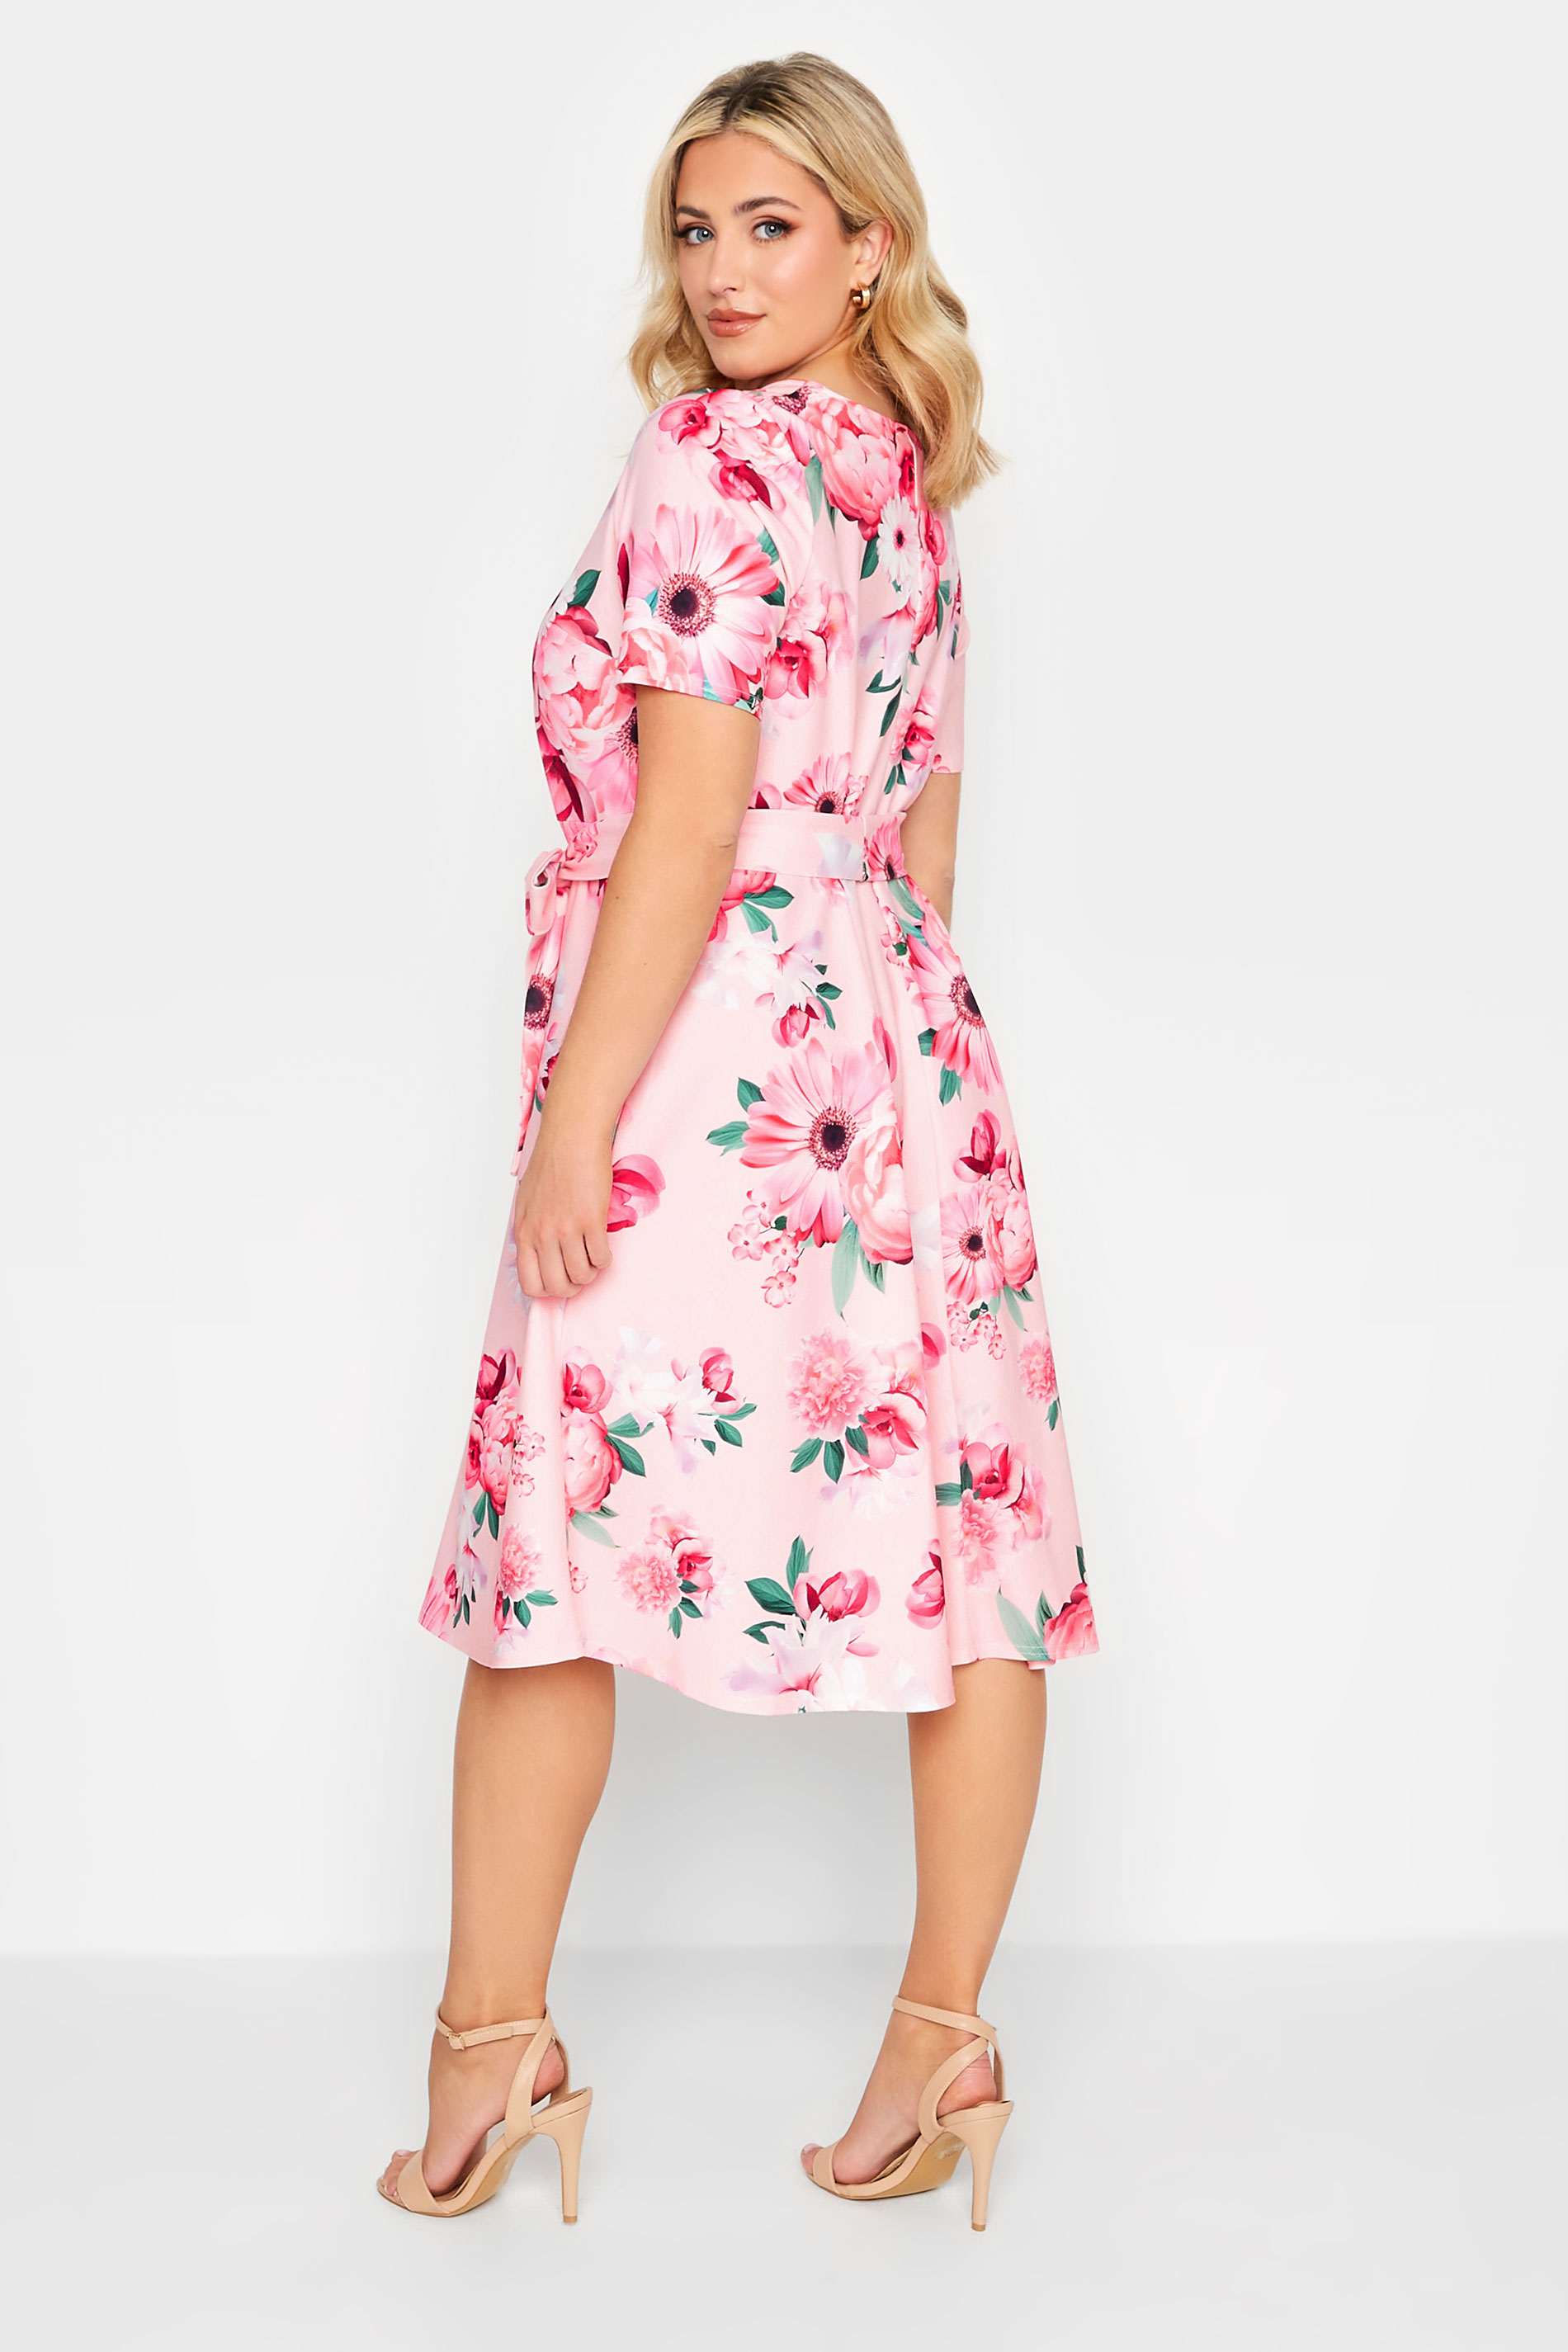 YOURS LONDON Plus Size Pink Floral Print Skater Dress | Yours Clothing